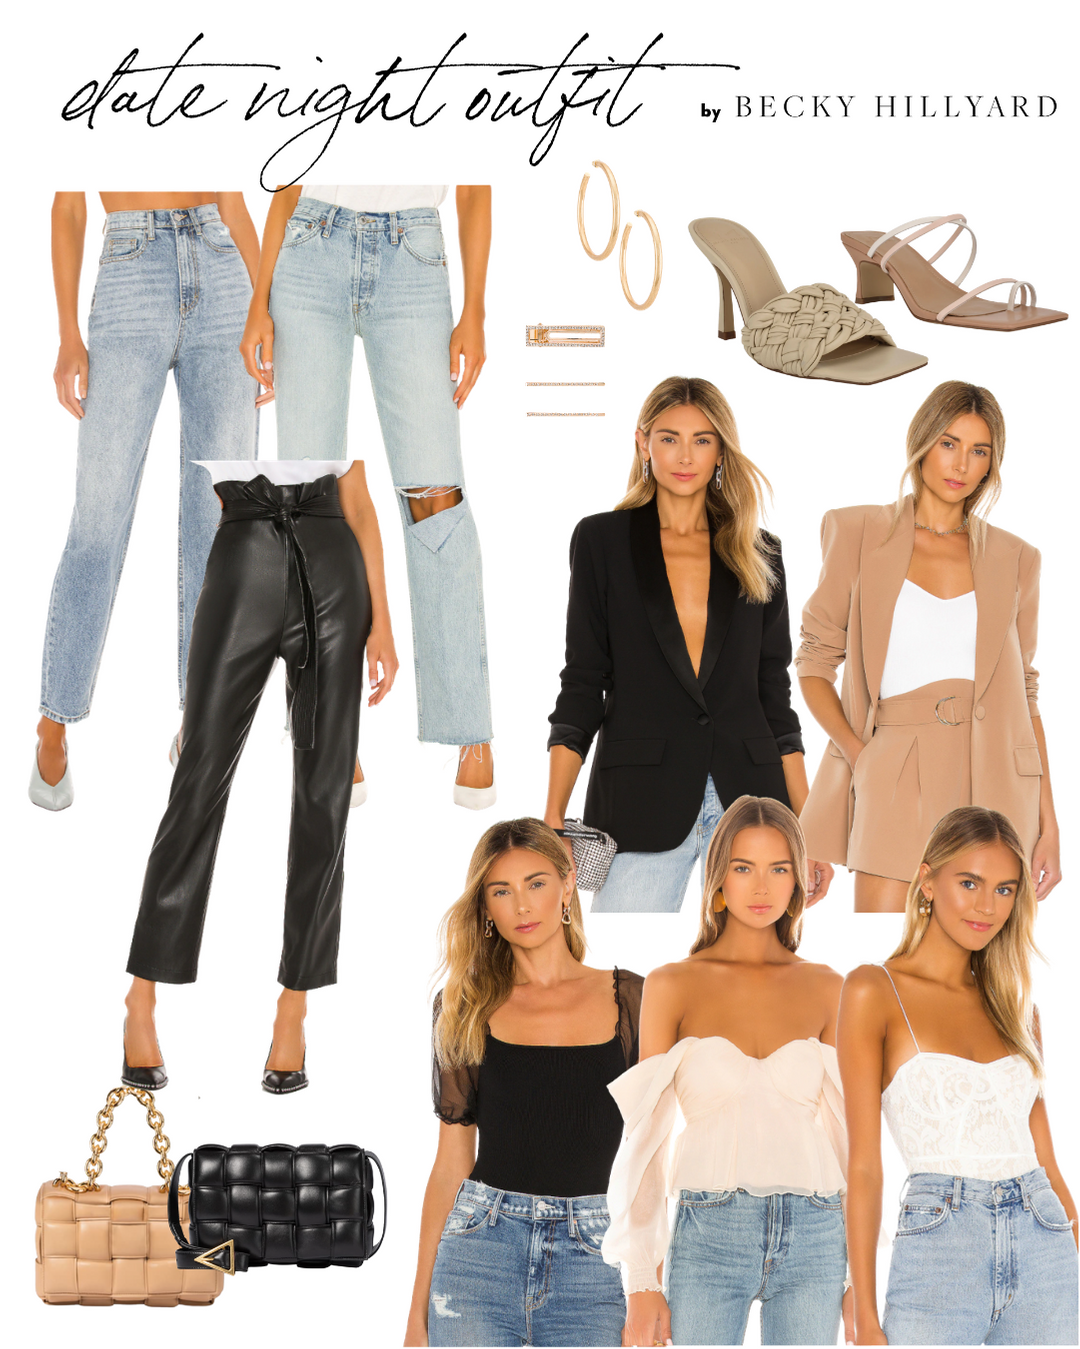 https://cellajane.com/wp-content/uploads/2021/03/date-night-outfit.png